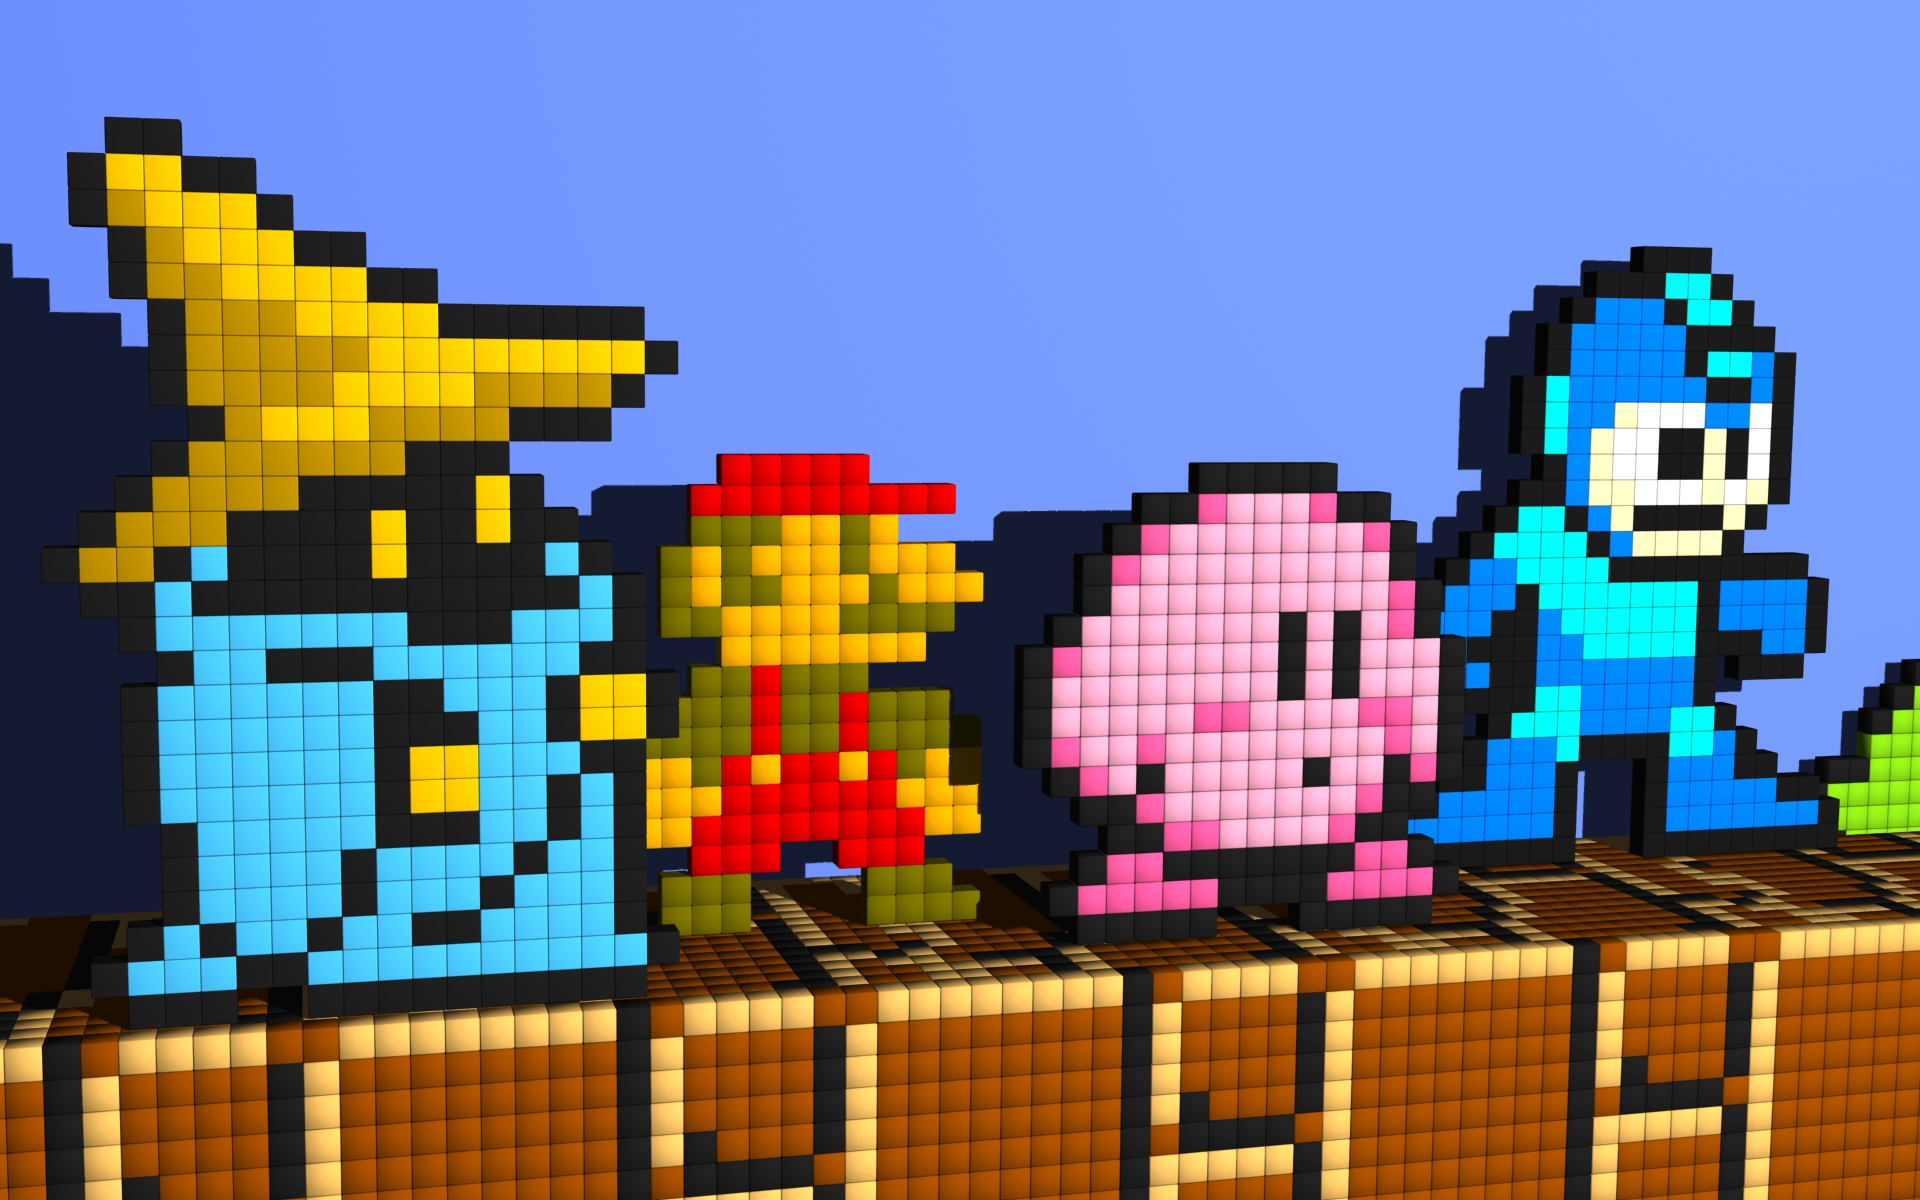 Classic video game characters in an 8-bit style, surrounded by brick blocks.